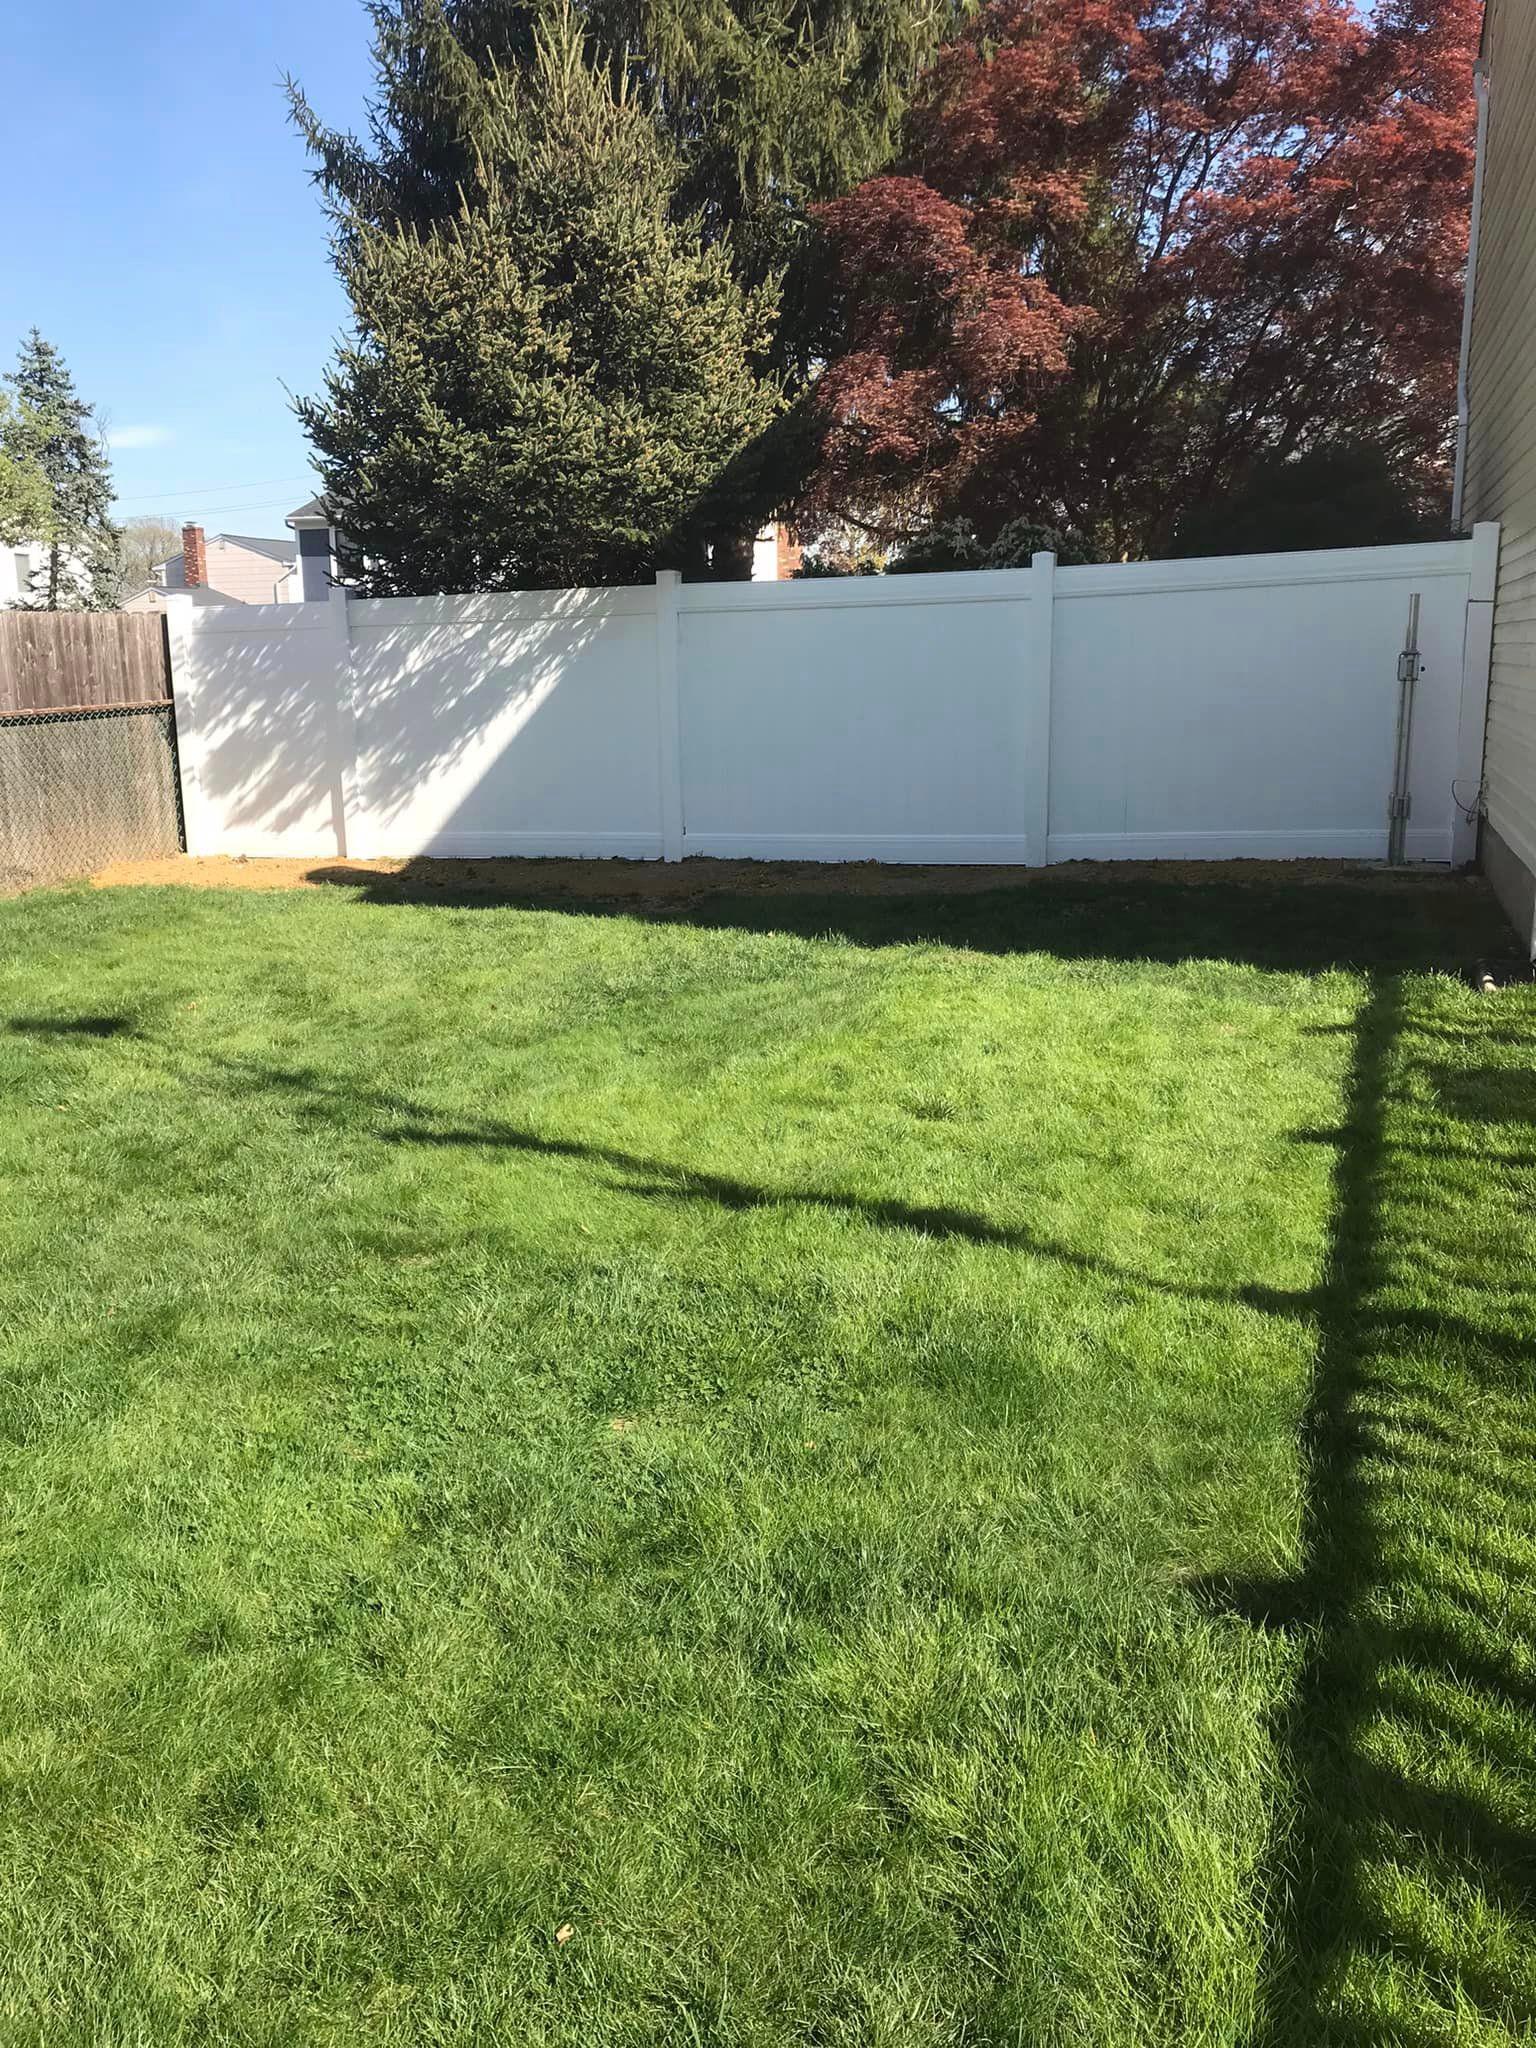 F.R.A Landscaping offers professional lawn maintenance services to keep your outdoor spaces looking their best. Our dedicated team takes care of everything, from mowing and edging to fertilizing and weed control, ensuring your lawn remains healthy and vibrant year-round.